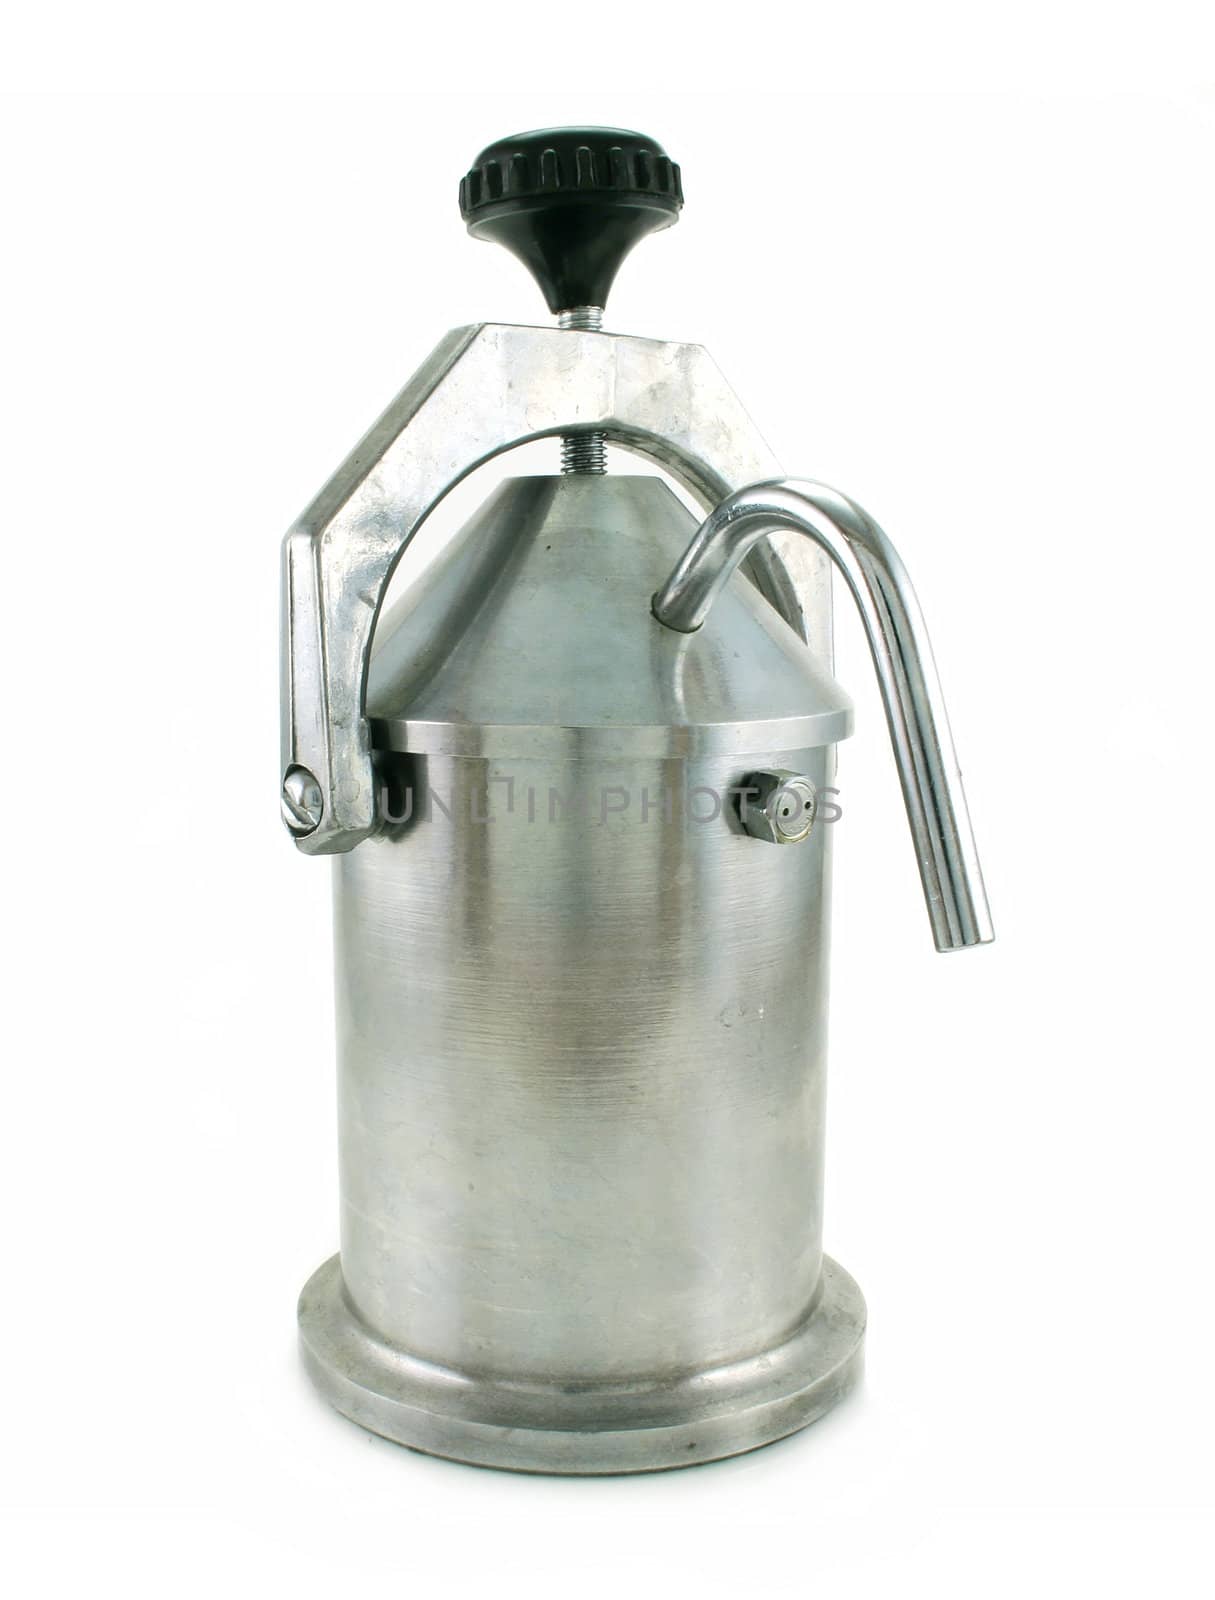 Metallic coffee percolator isolated on a white background